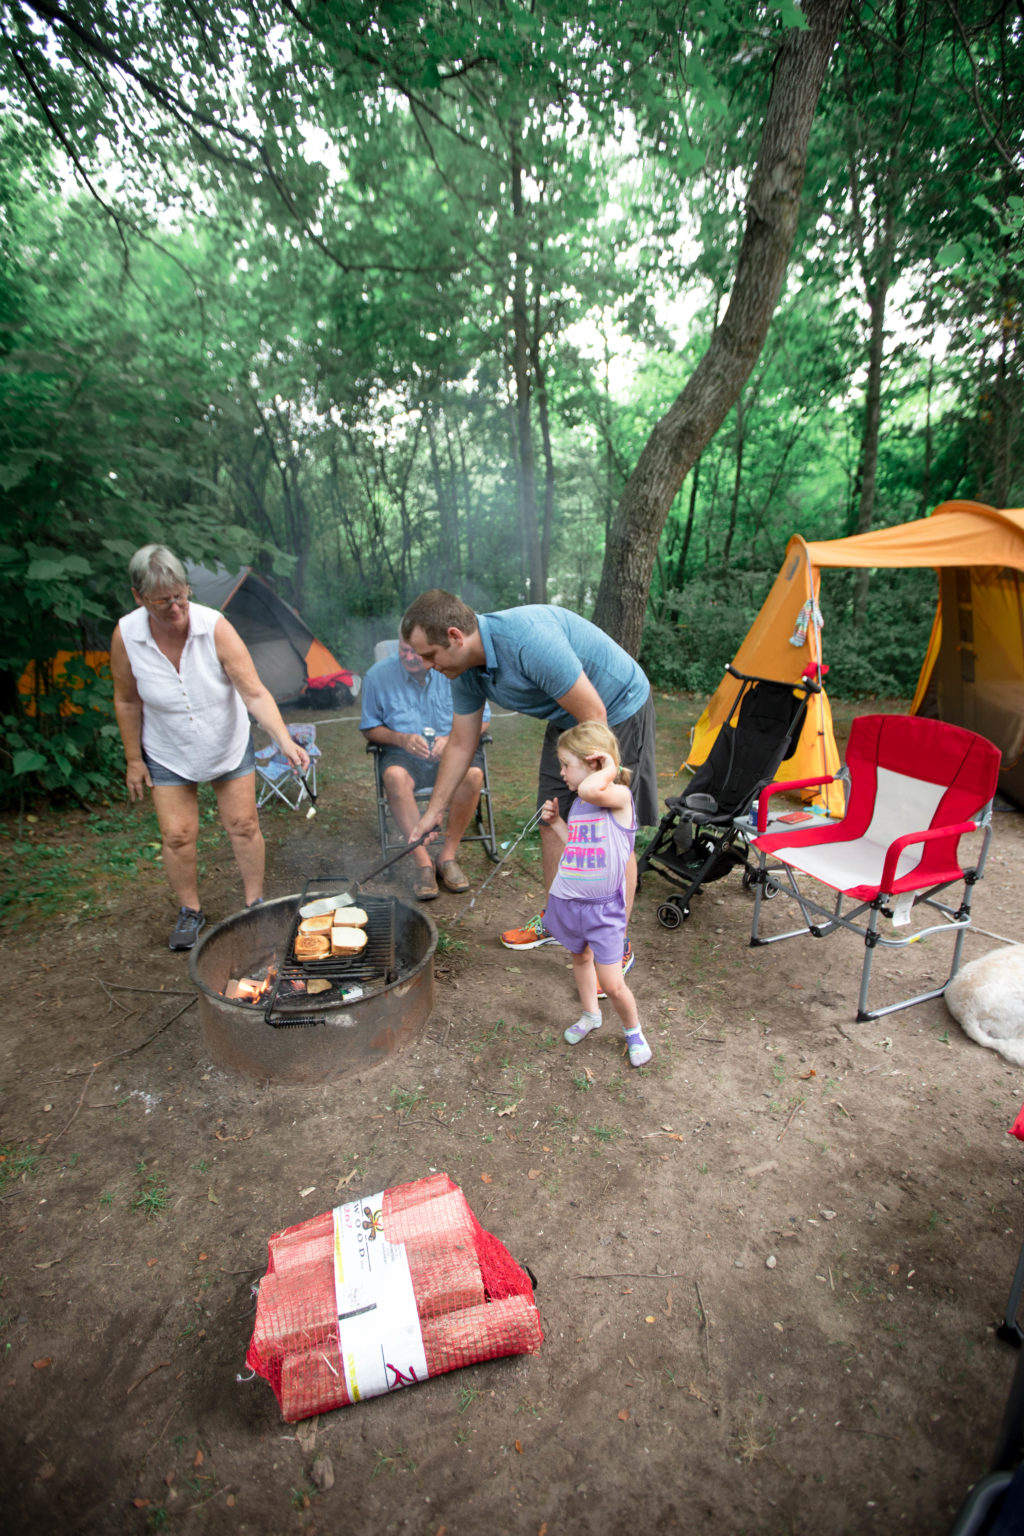 When Does Camping Season Start? What's the Best Month for Camping?